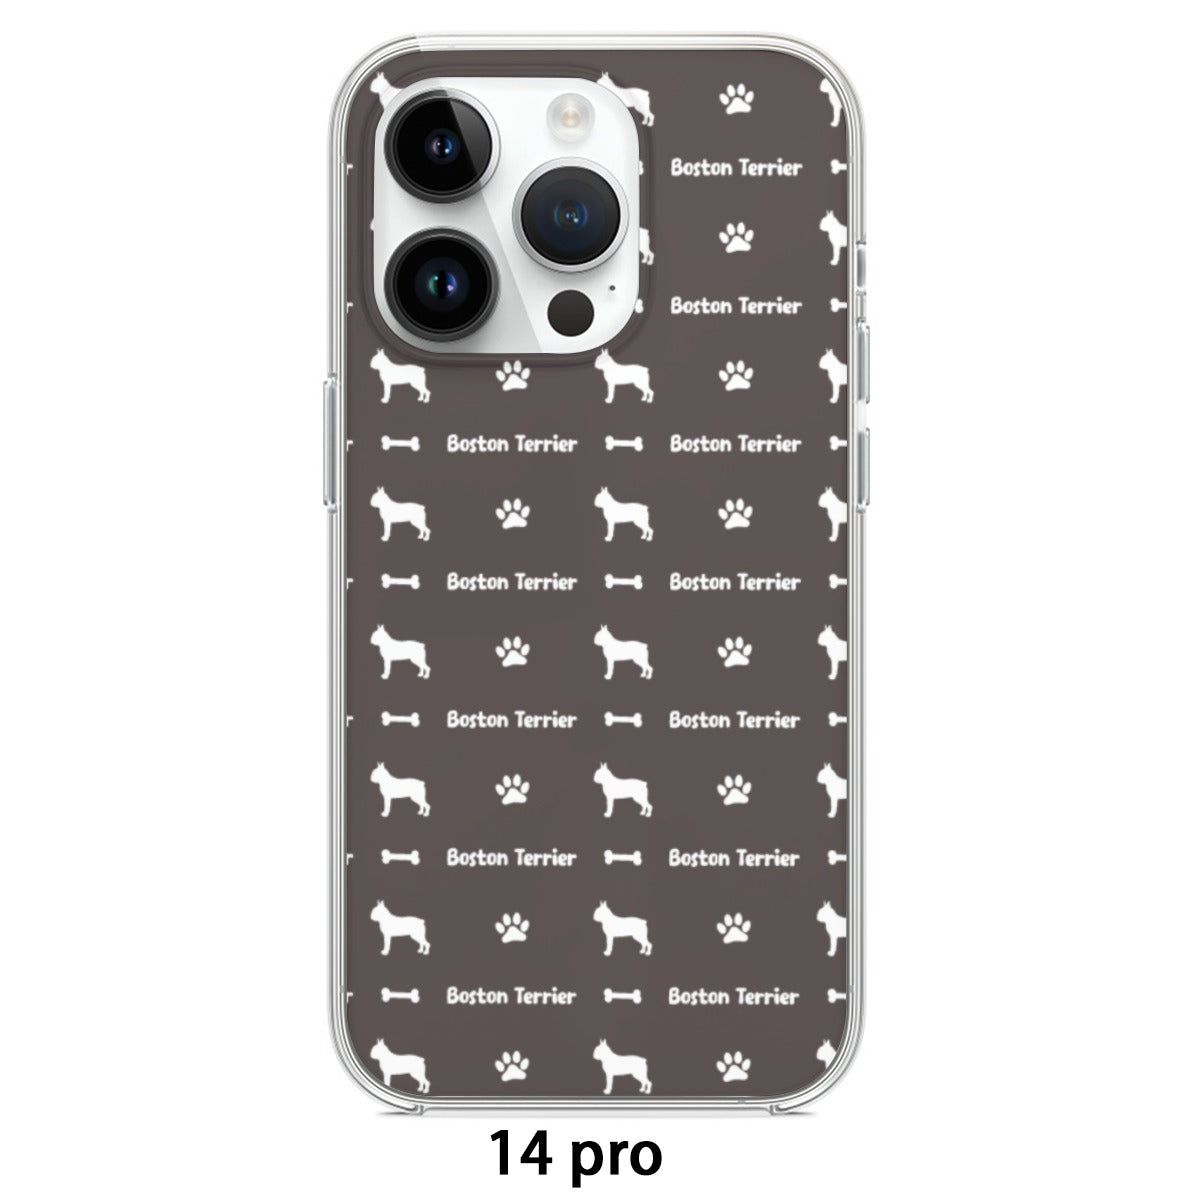 Leia- iPhone case for Boston Terrier lovers